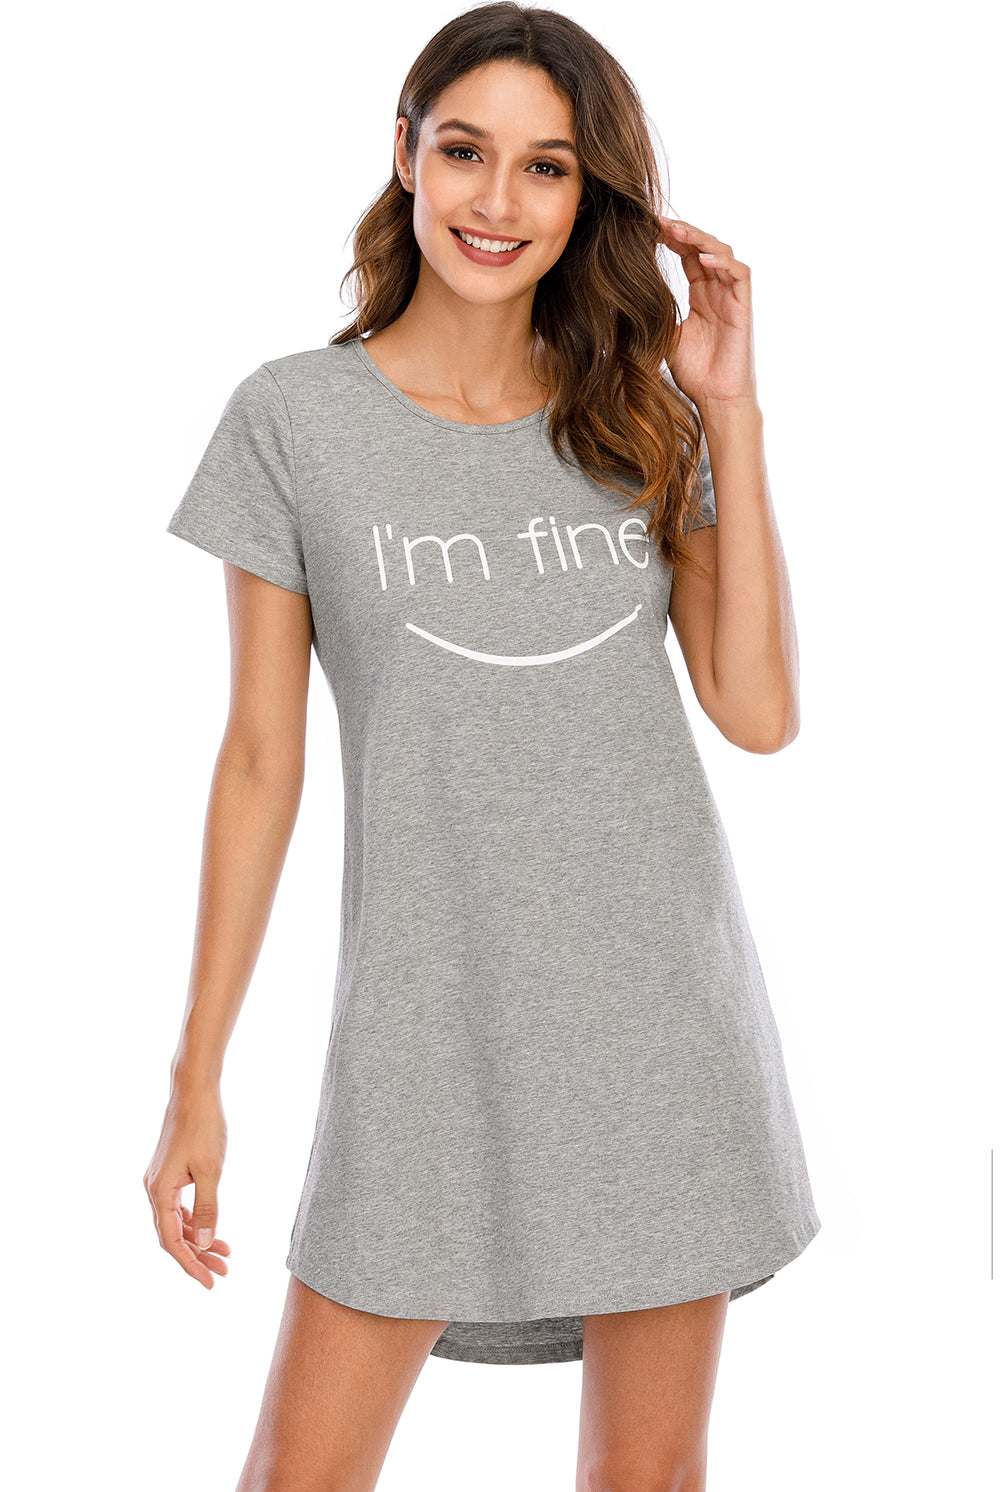 A woman smiles softly, wearing a comfortable heather grey lounge dress with a playful "I'm fine" print accompanied by a smiley face on the front. The dress has a relaxed fit, round neckline, and short sleeves, perfect for a casual, laid-back look.